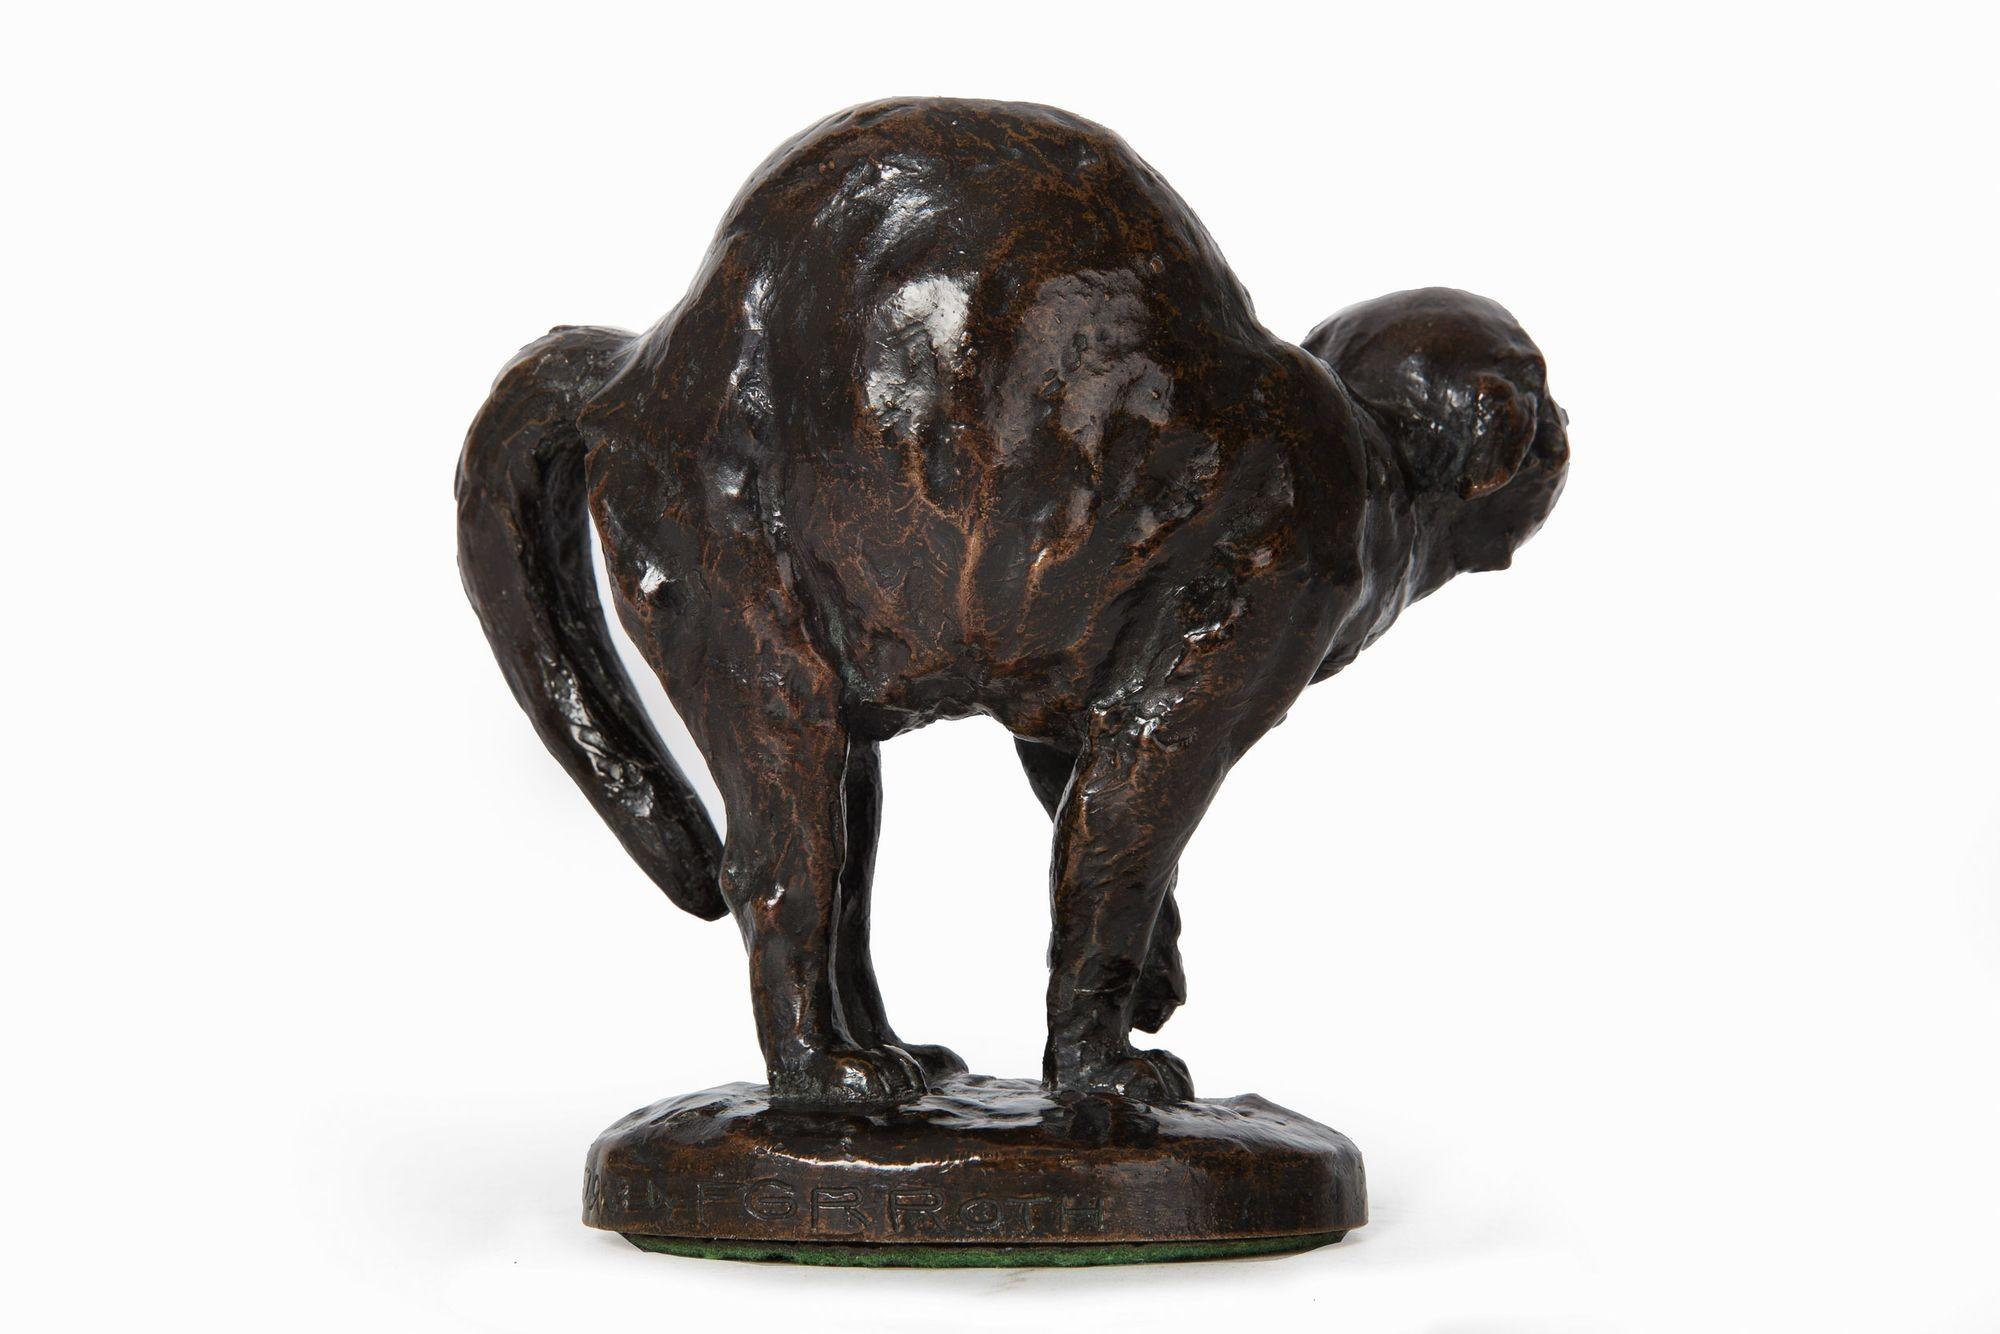 FREDERICK GEORGE RICHARD ROTH
United States, 1872-1944

Hissing Cat (1913)

Lost-wax cast bronze  Signed in cast 